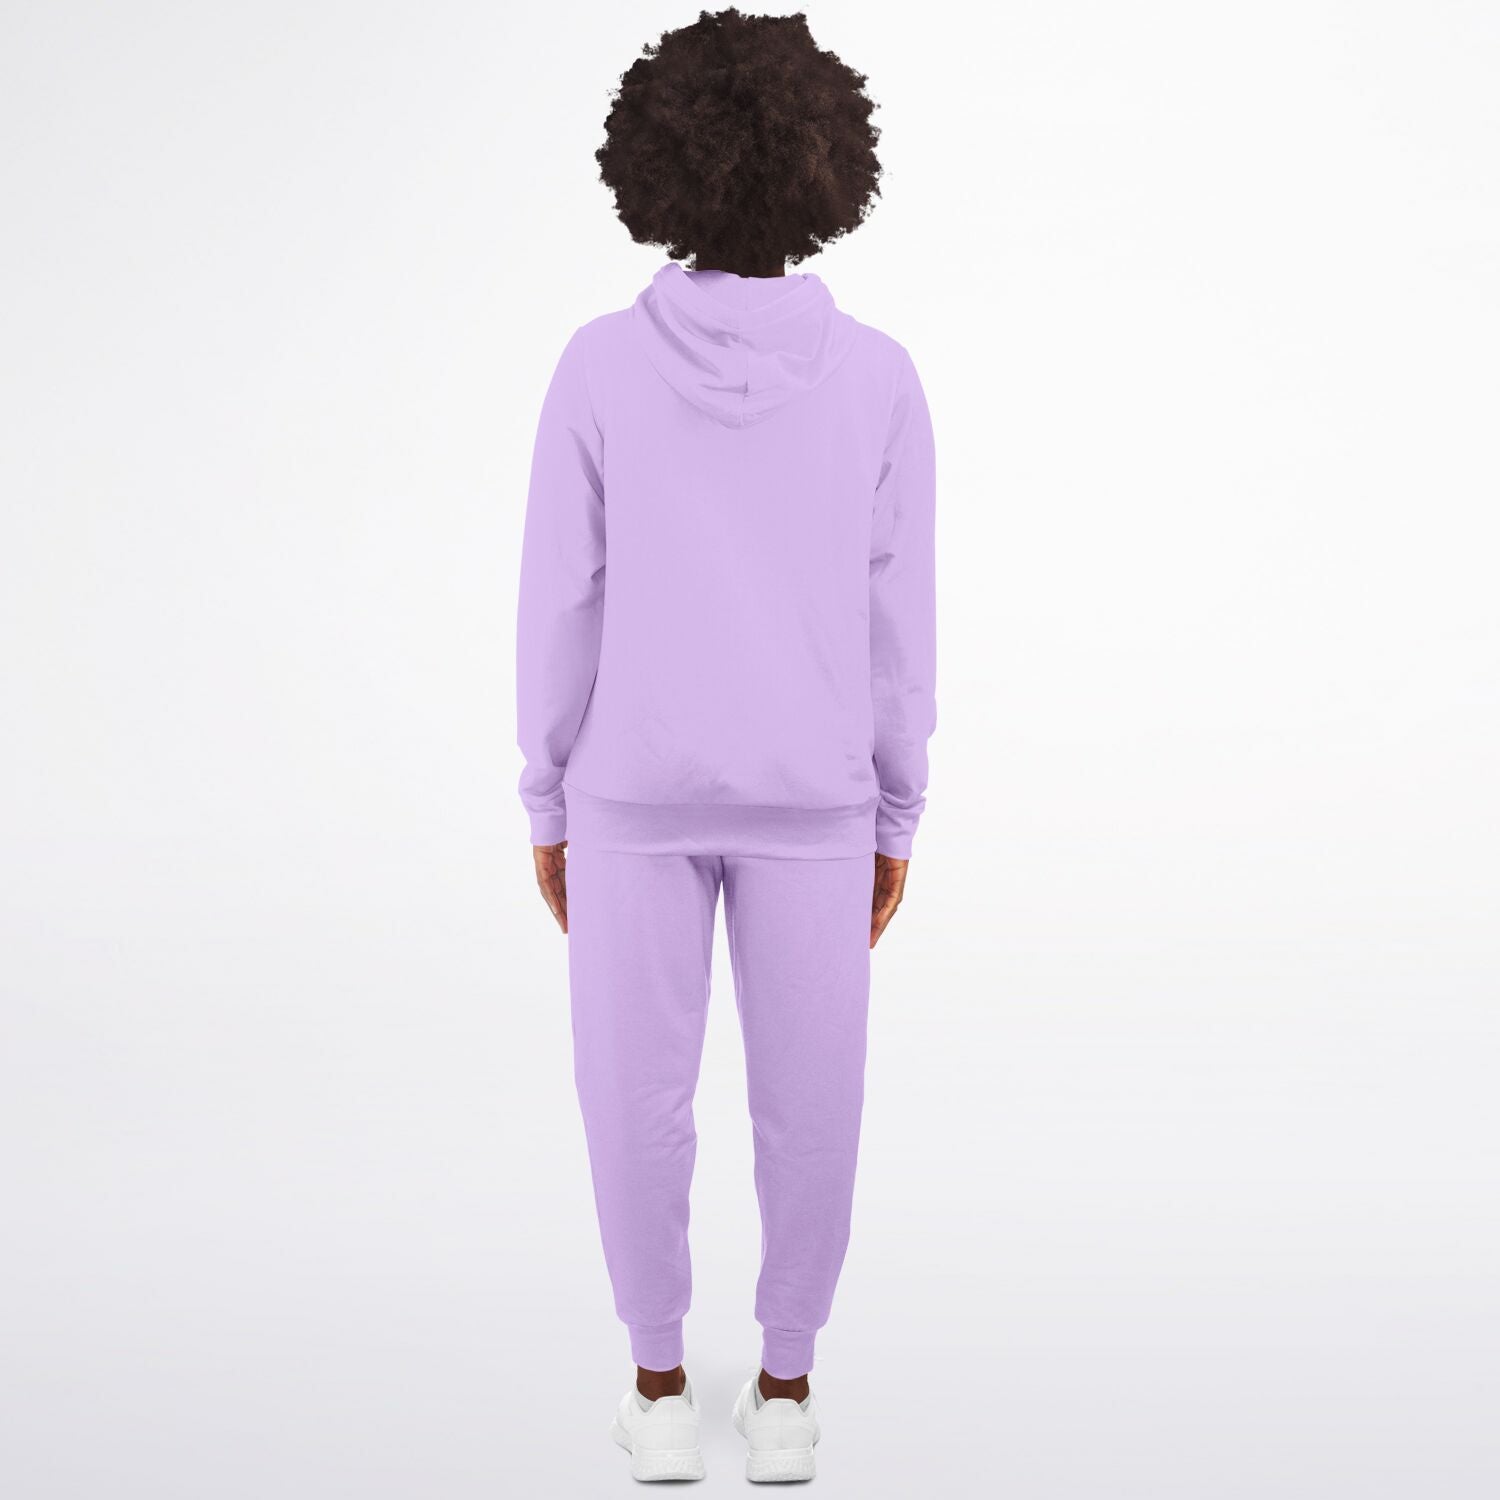 Violet zipper Hoodie and Jogger Set - Sport Finesse